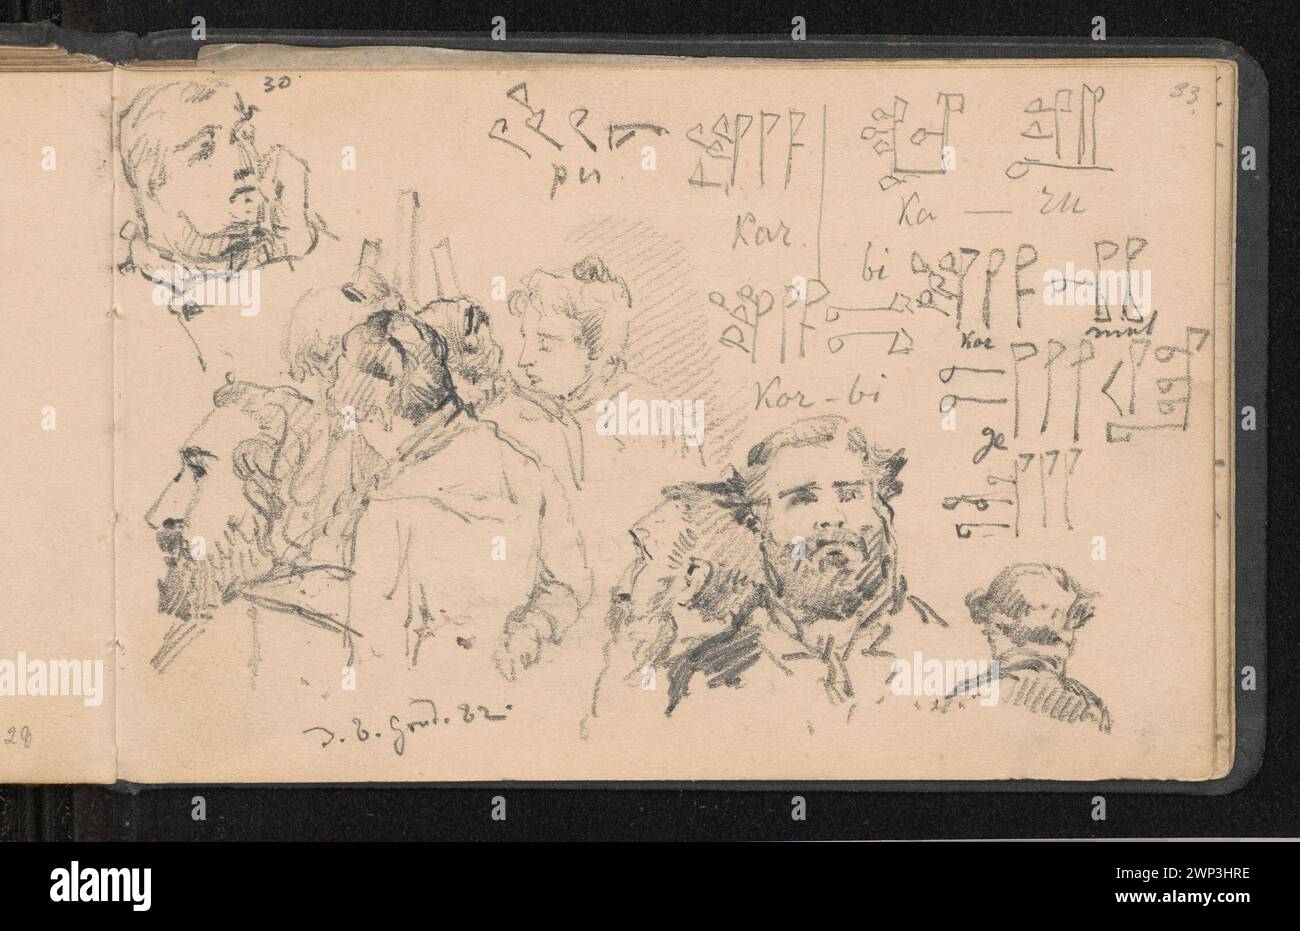 Sketches of the heads, including Tony Robert-Fleury; Students at the easel and exaggeration of wedge signs from the newlyasrian fragmentRenault, Wanda (1910-1990) - collection, travel, portrait study, purchase (provenance) Stock Photo